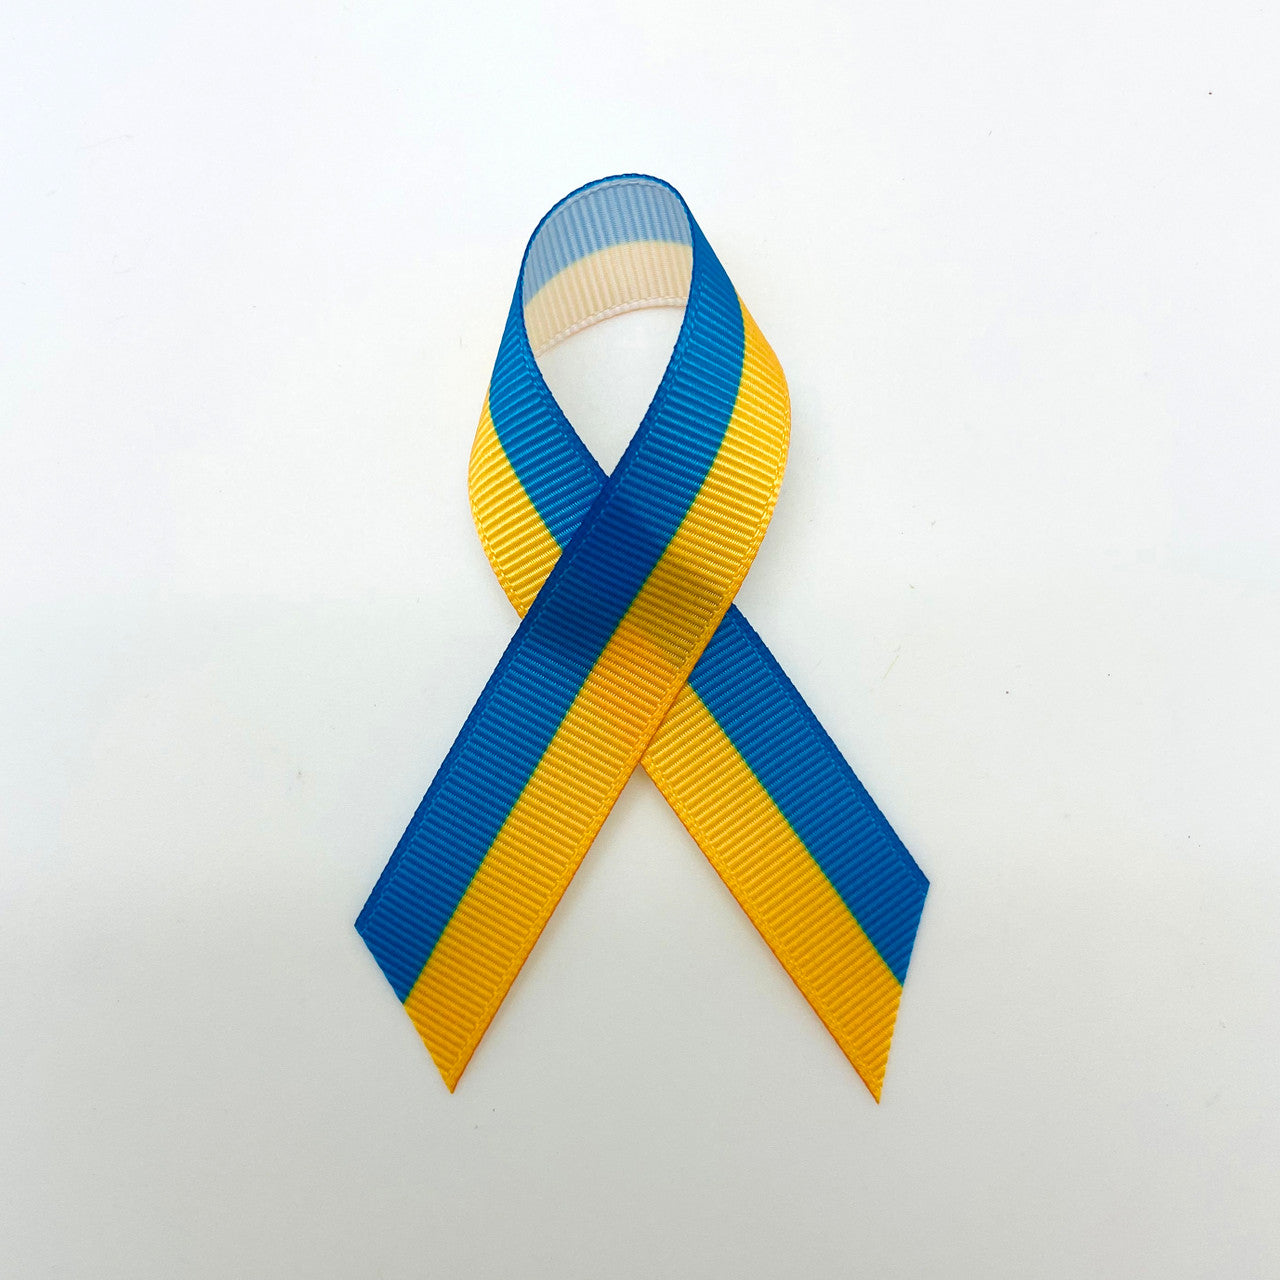 Our Ukraine flag ribbon is perfect for lapel pins bringing awareness to and honoring those suffering in the Ukraine during this time of war.